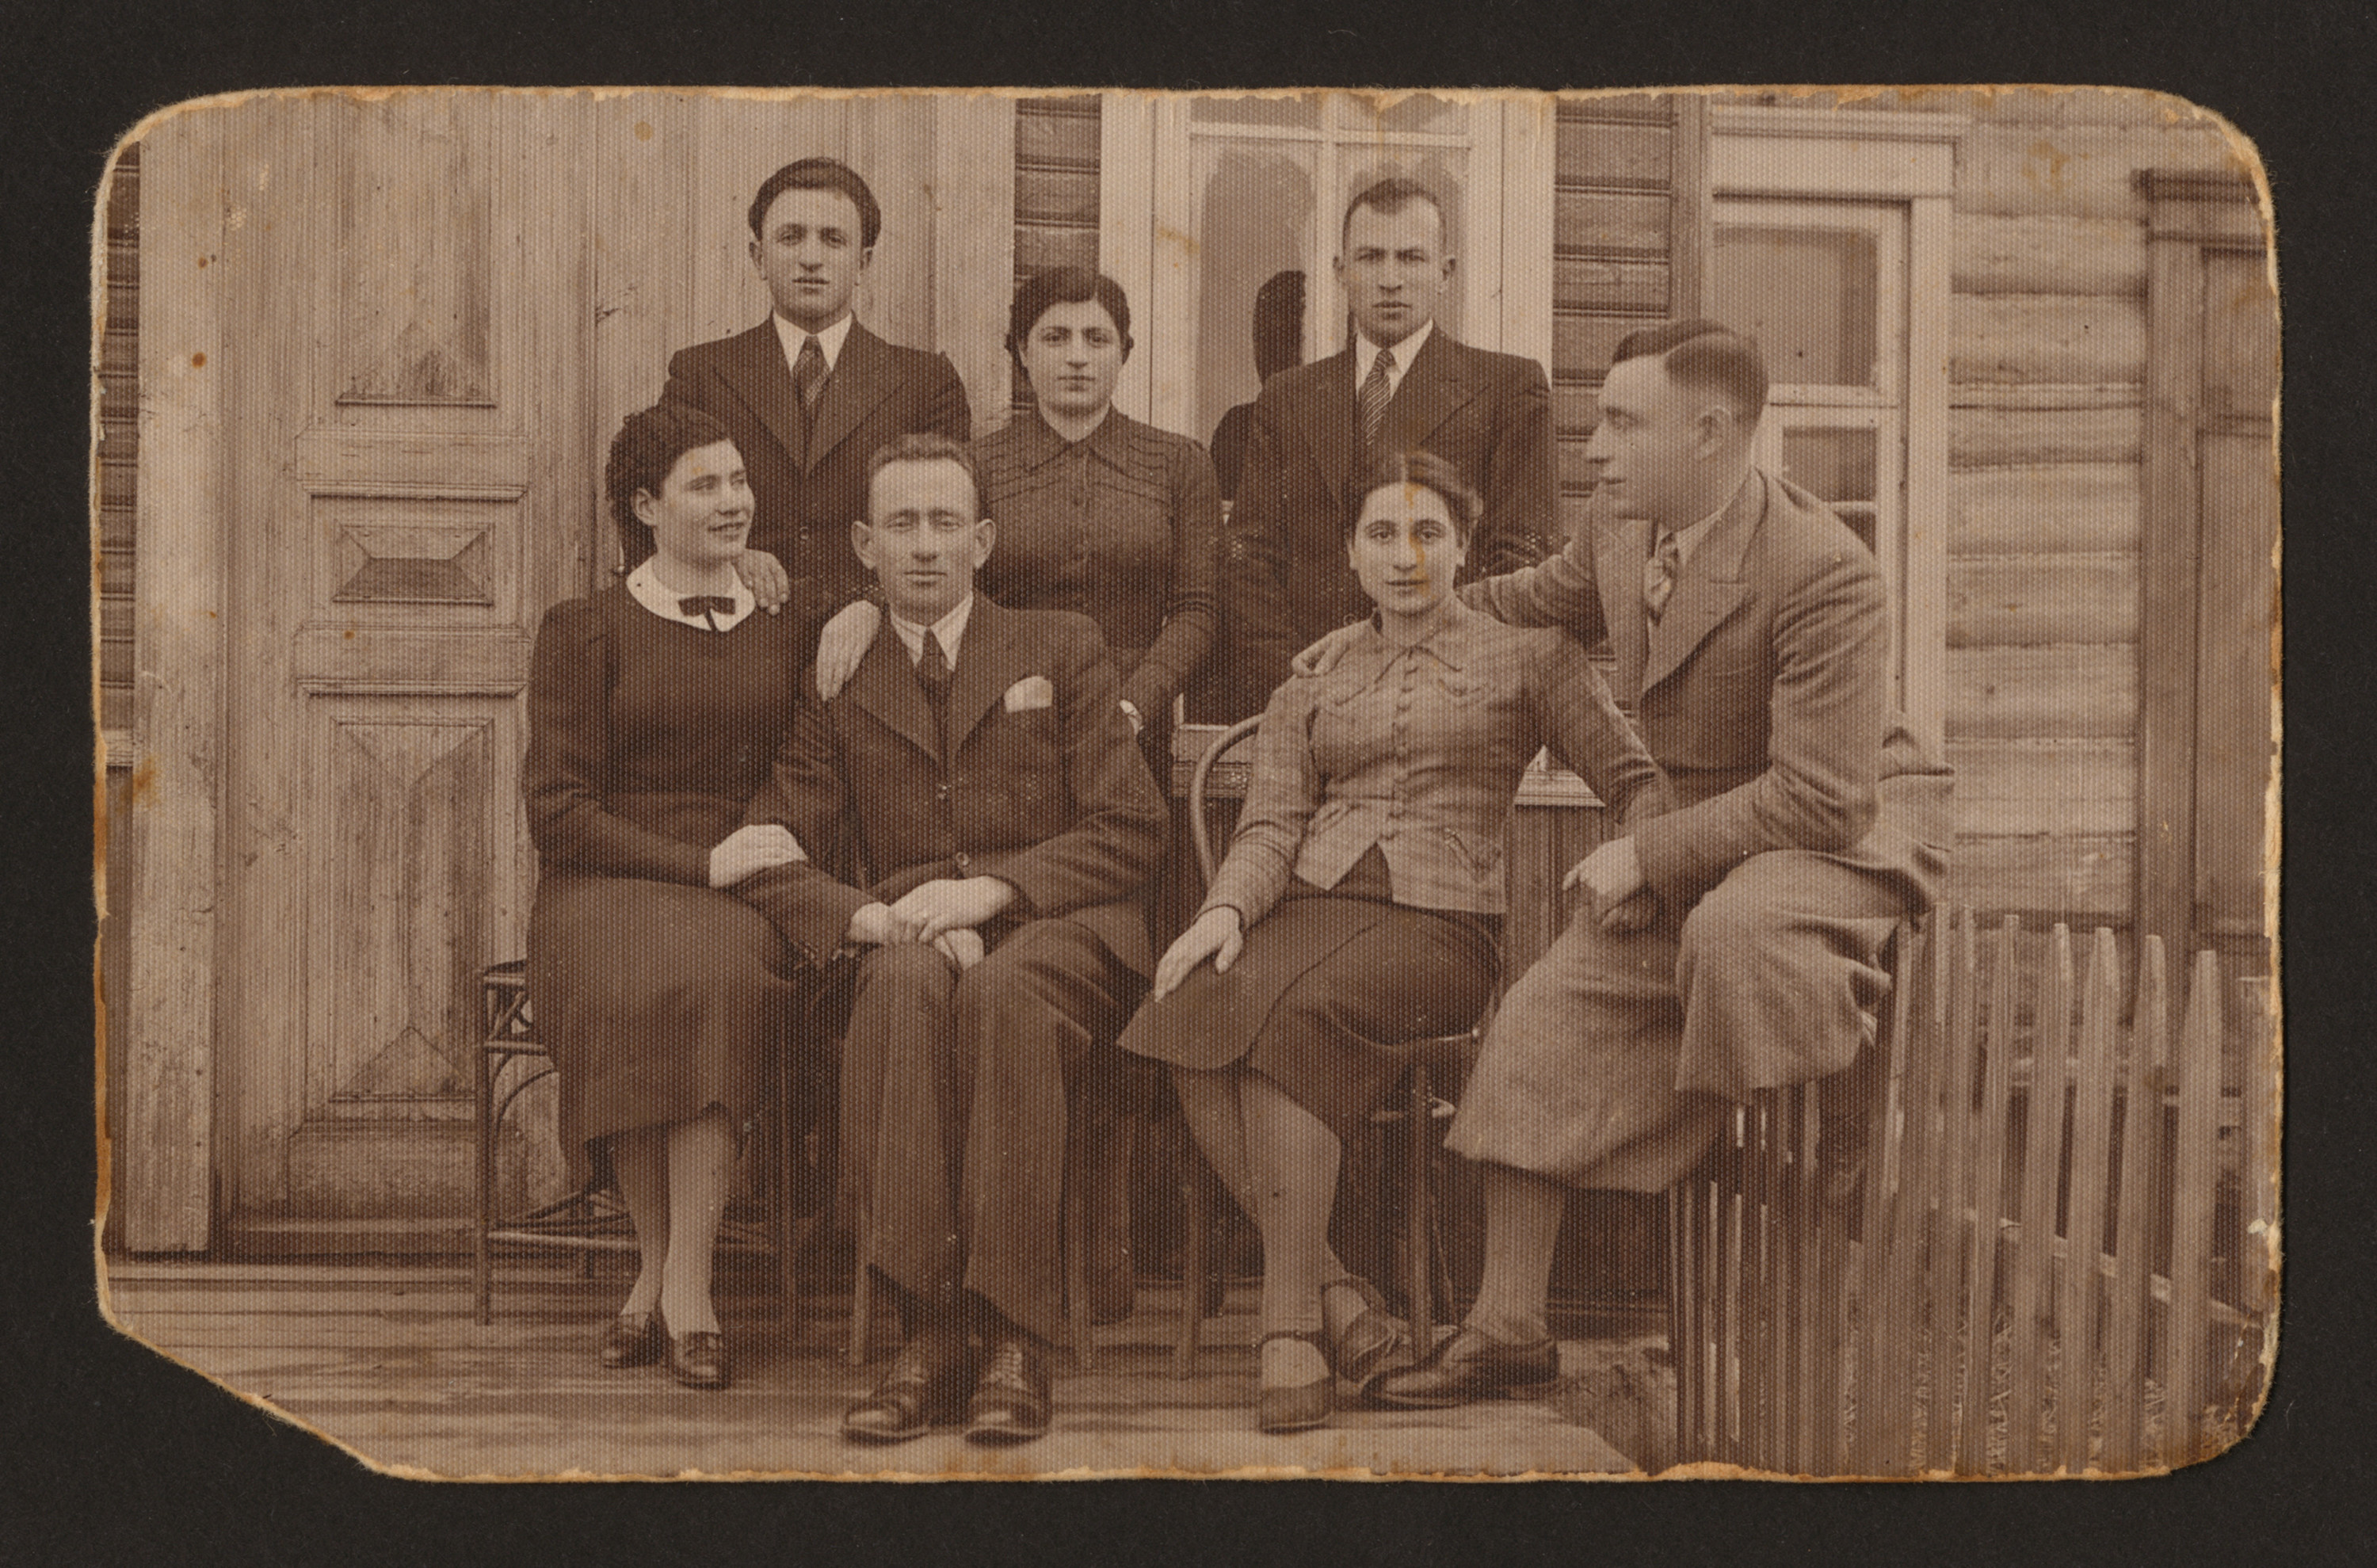 Group portrait of the Markman siblings and friends on a porch of a home in Parafianov, Poland (now Belarus), April 18,1938

Seated in the front row (left to right) are Chaya Markman, [unidentified], Genia Markman, and Moshe Markman.  Pictured in the back row (left to right) are [unidentified], Zlatah Markman, and [unidentified].